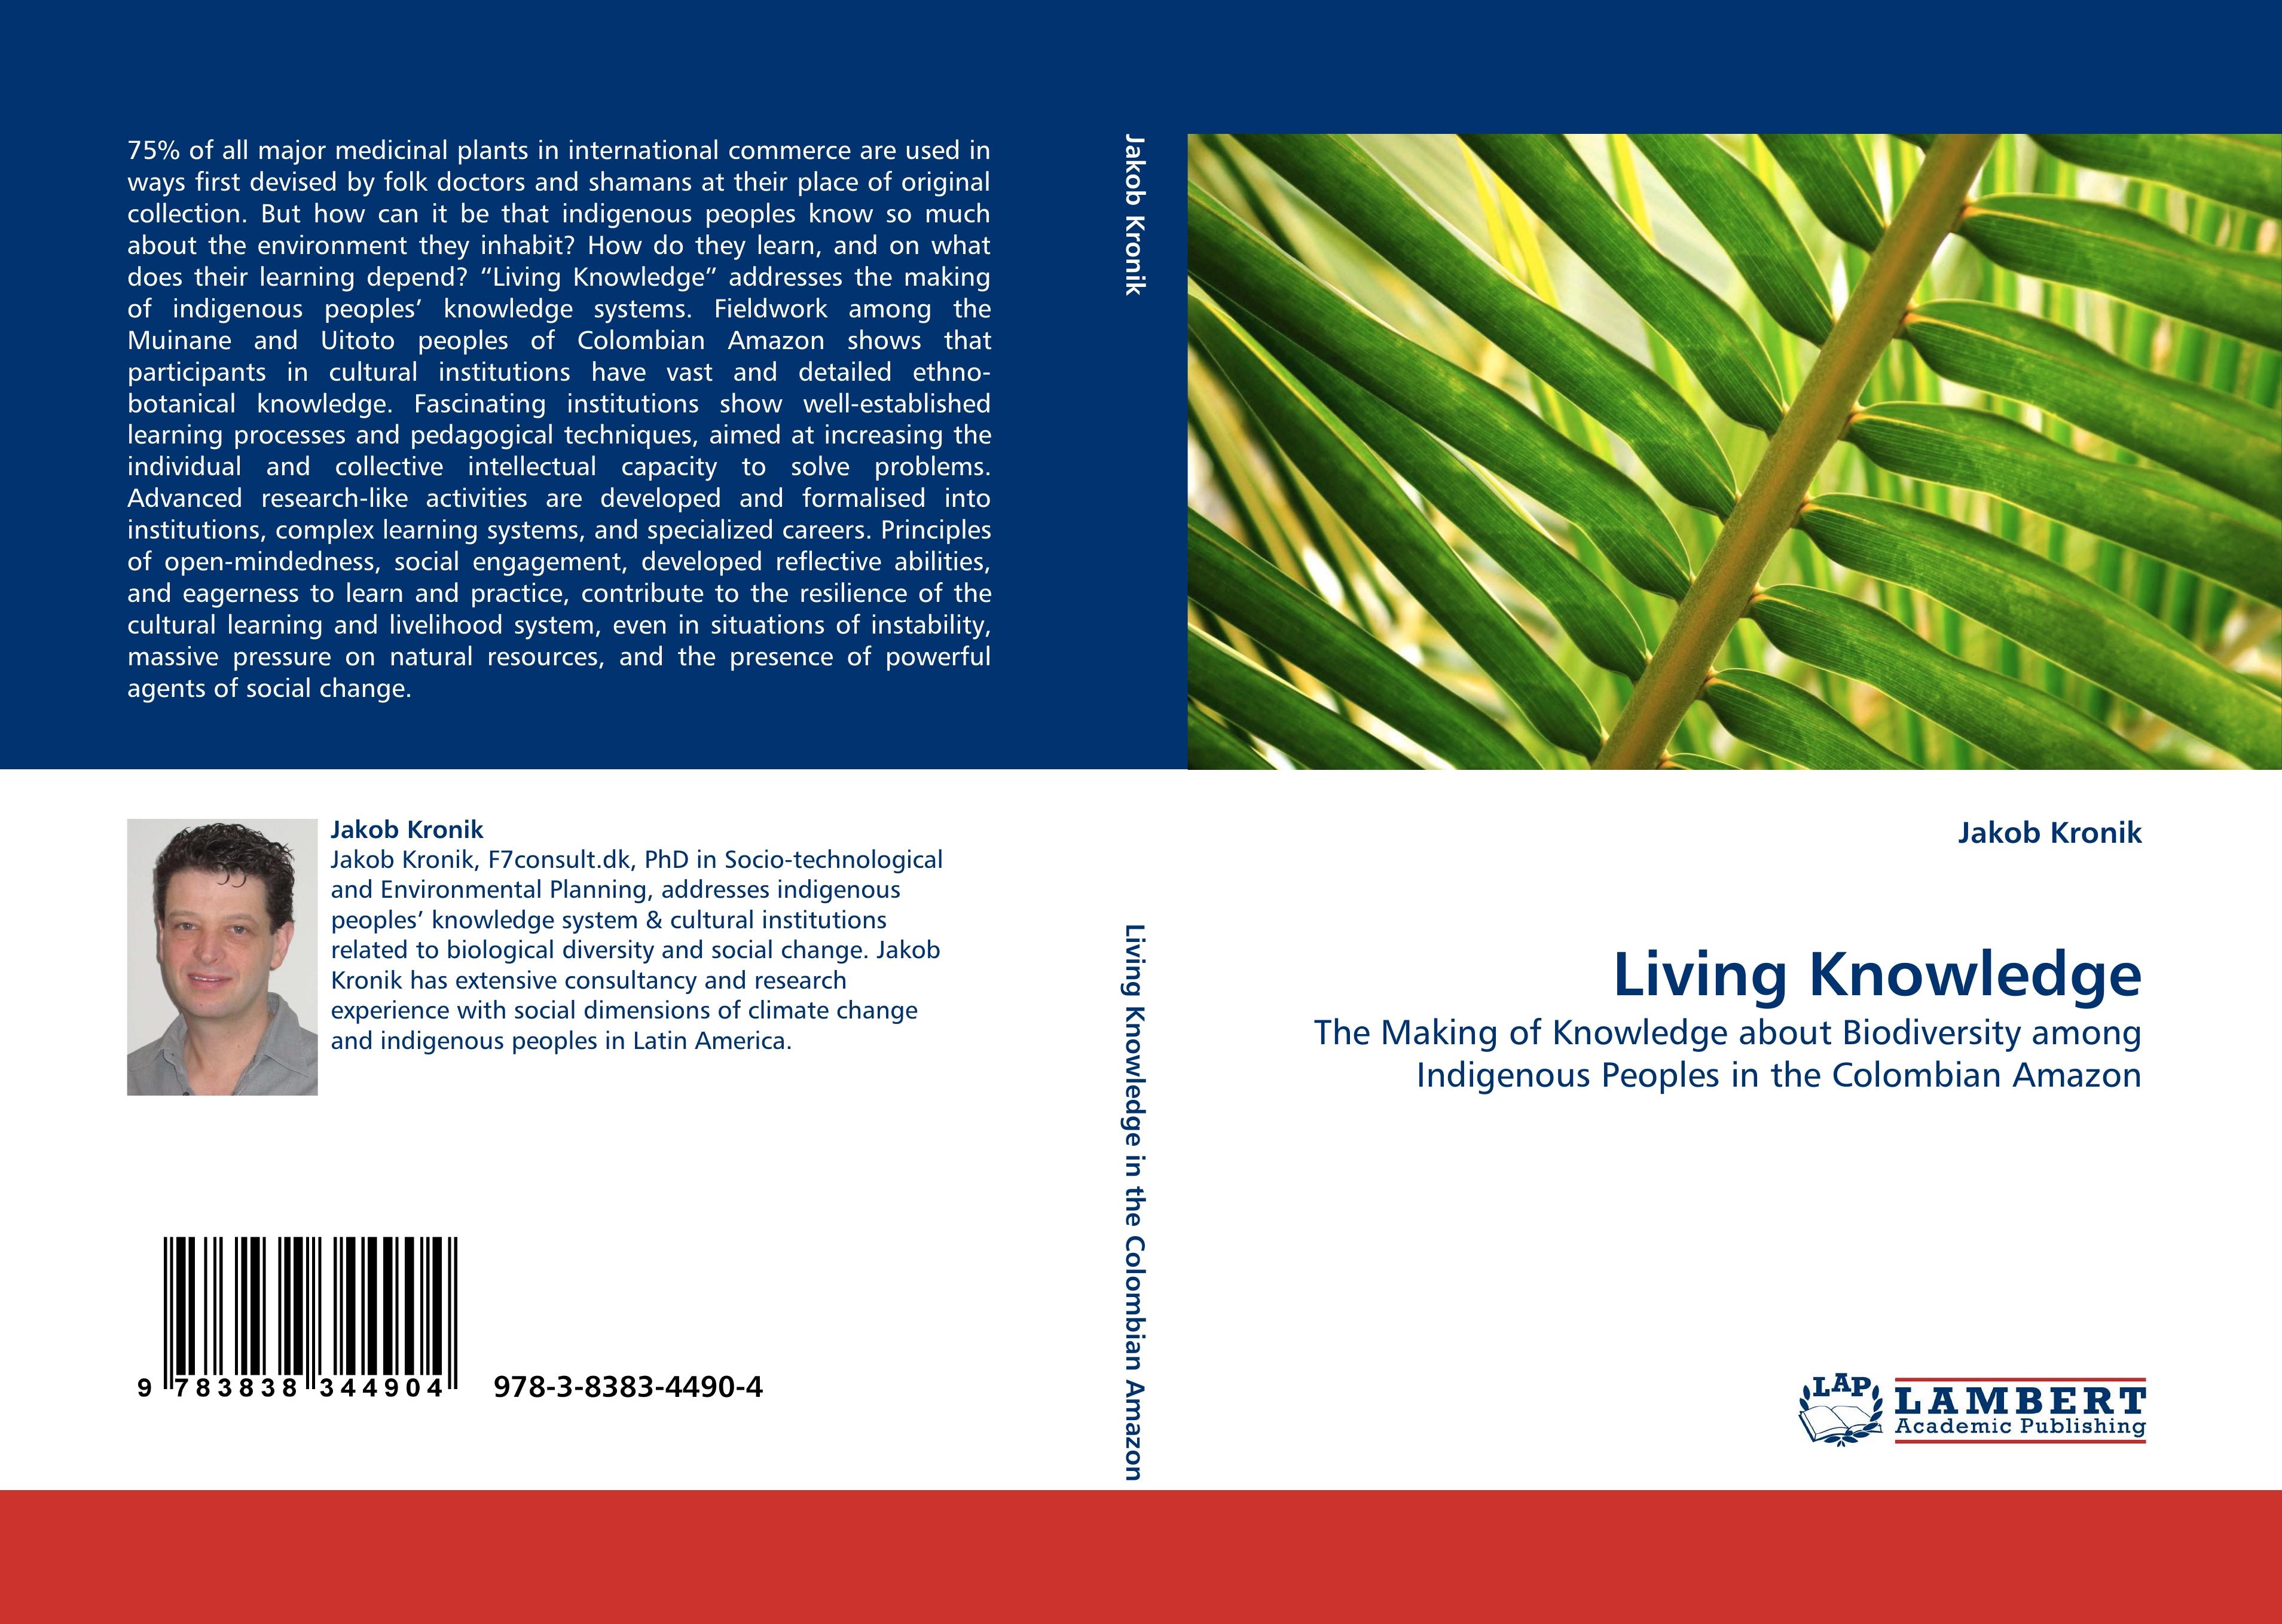 Living Knowledge / The Making of Knowledge about Biodiversity among Indigenous Peoples in the Colombian Amazon / Jakob Kronik / Taschenbuch / Paperback / 220 S. / Englisch / 2010 / EAN 9783838344904 - Kronik, Jakob